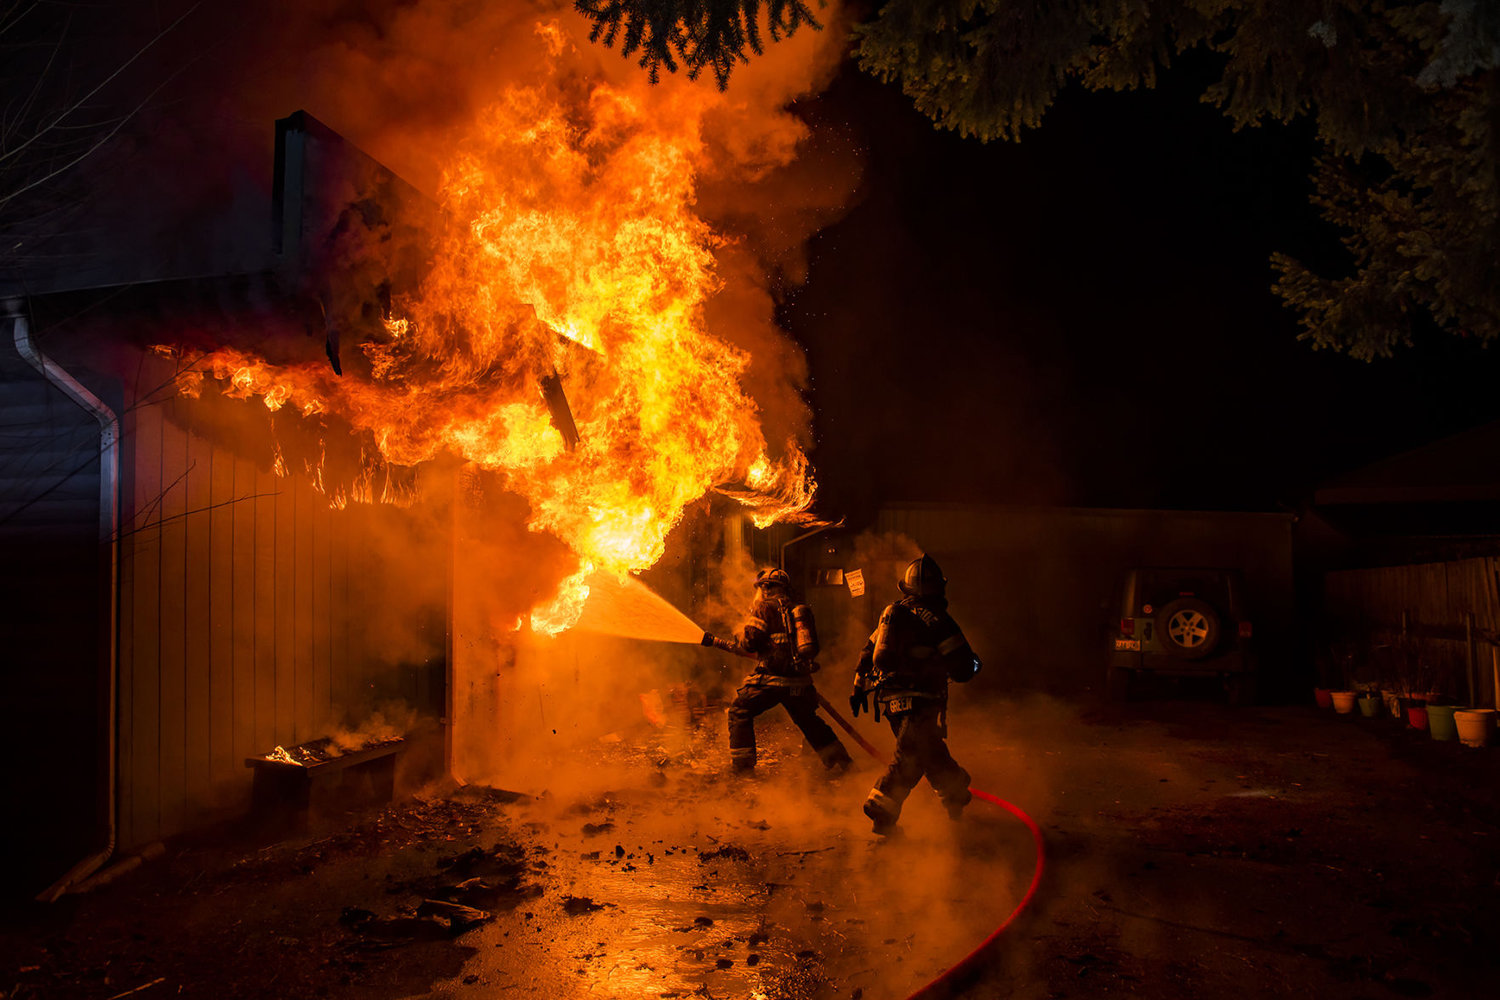 RFA firefighters rush to put out a house fire while spraying down a room fully engulfed in flames in the 1300 block of West Main Street Jan. 25, 2019 in Centralia.